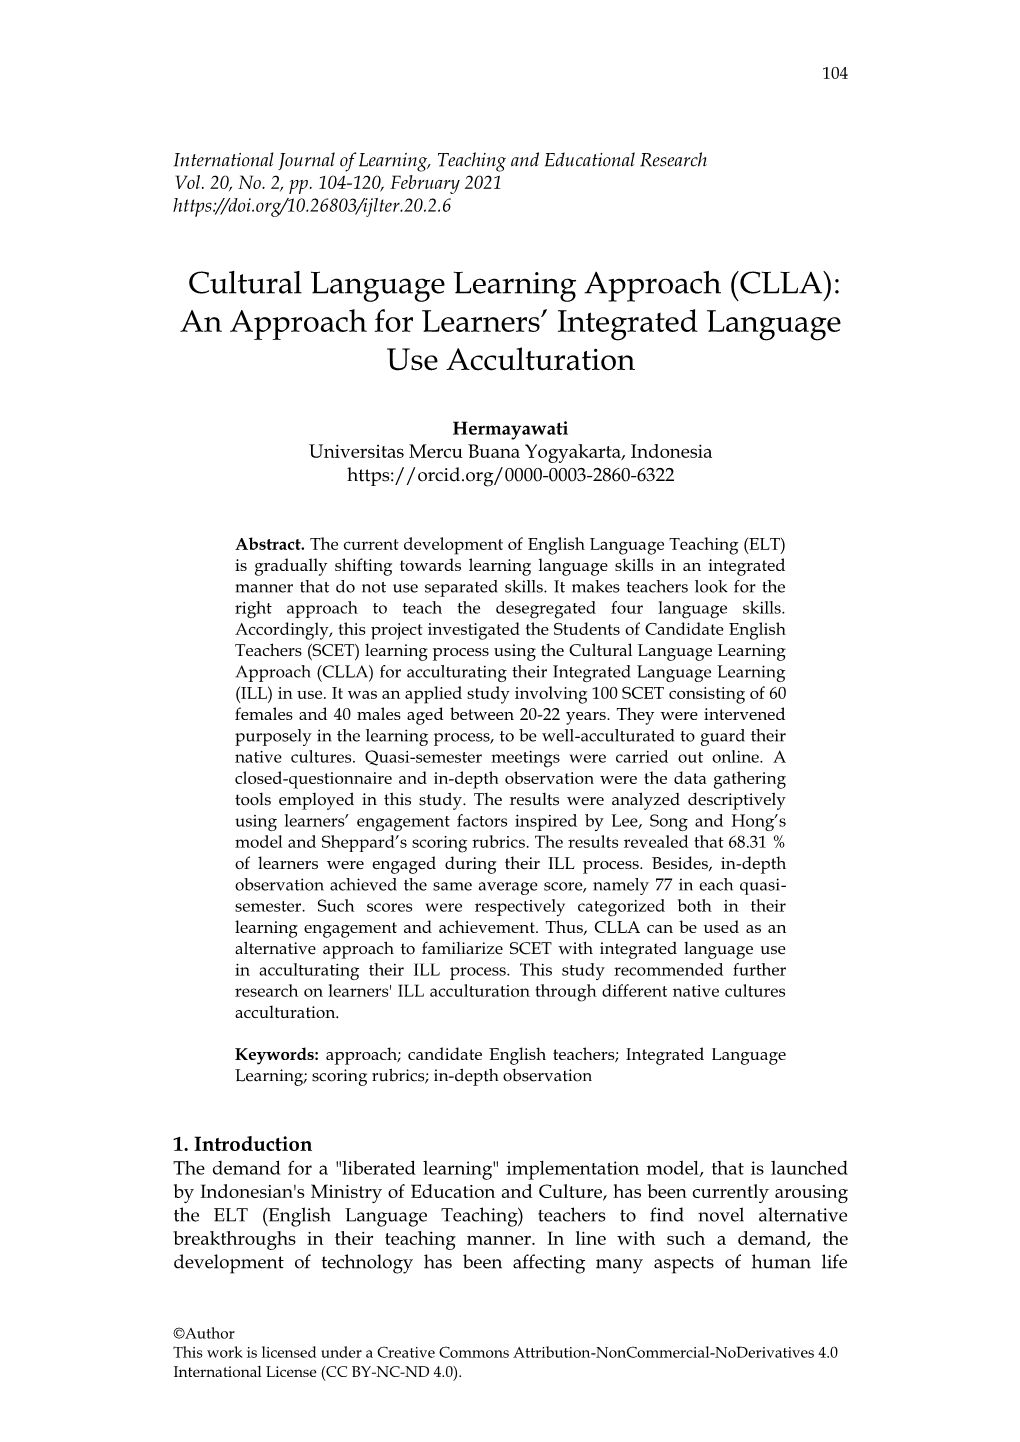 Cultural Language Learning Approach (CLLA): an Approach for Learners’ Integrated Language Use Acculturation